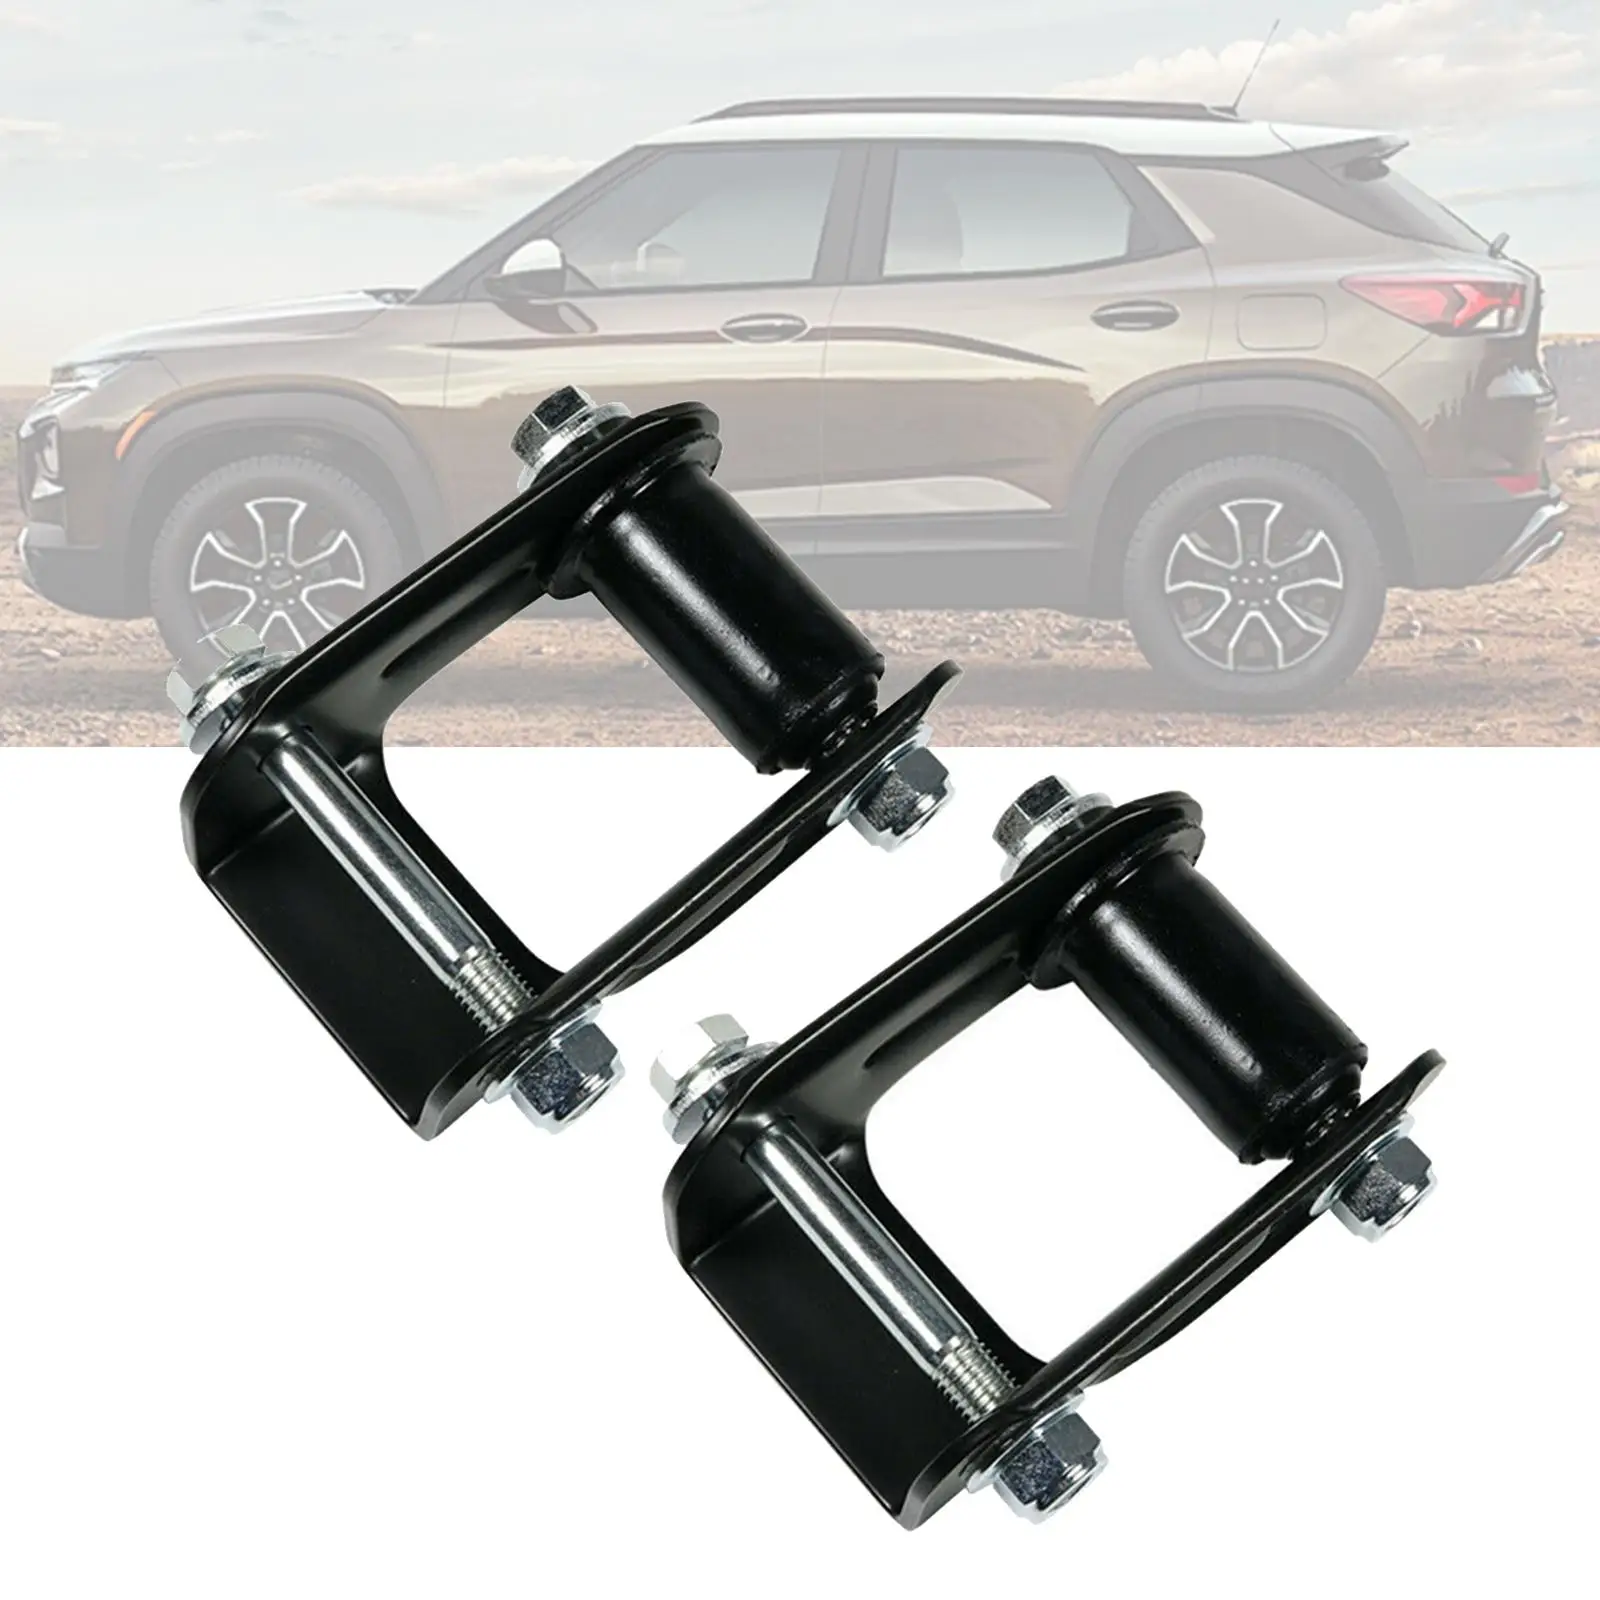 2x Leaf Spring Shackle Kit Durable Spare Parts Easily Install replacement Chevrolet S10 Pickup Blazer S10 Blazer